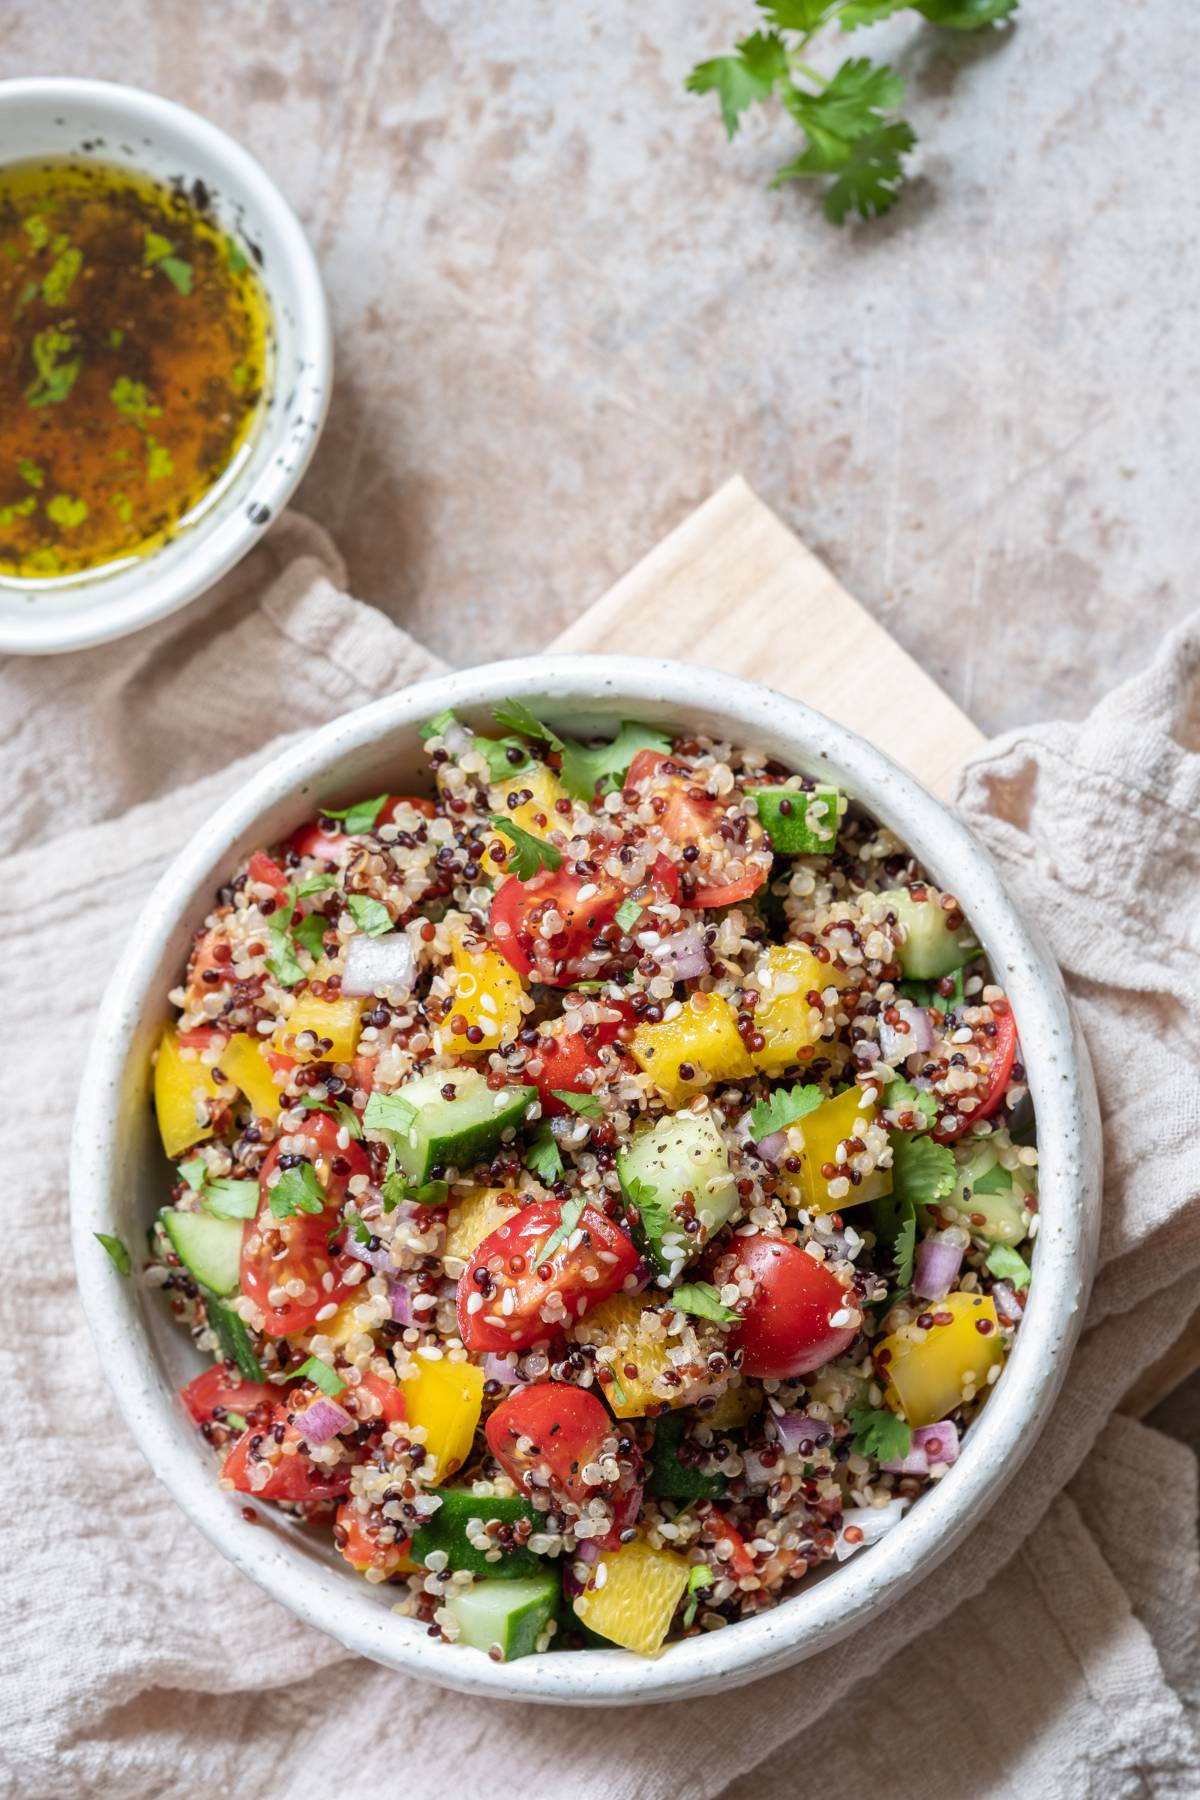 Quick And Healthy Lunch Ideas For Your Next Event: Top 15